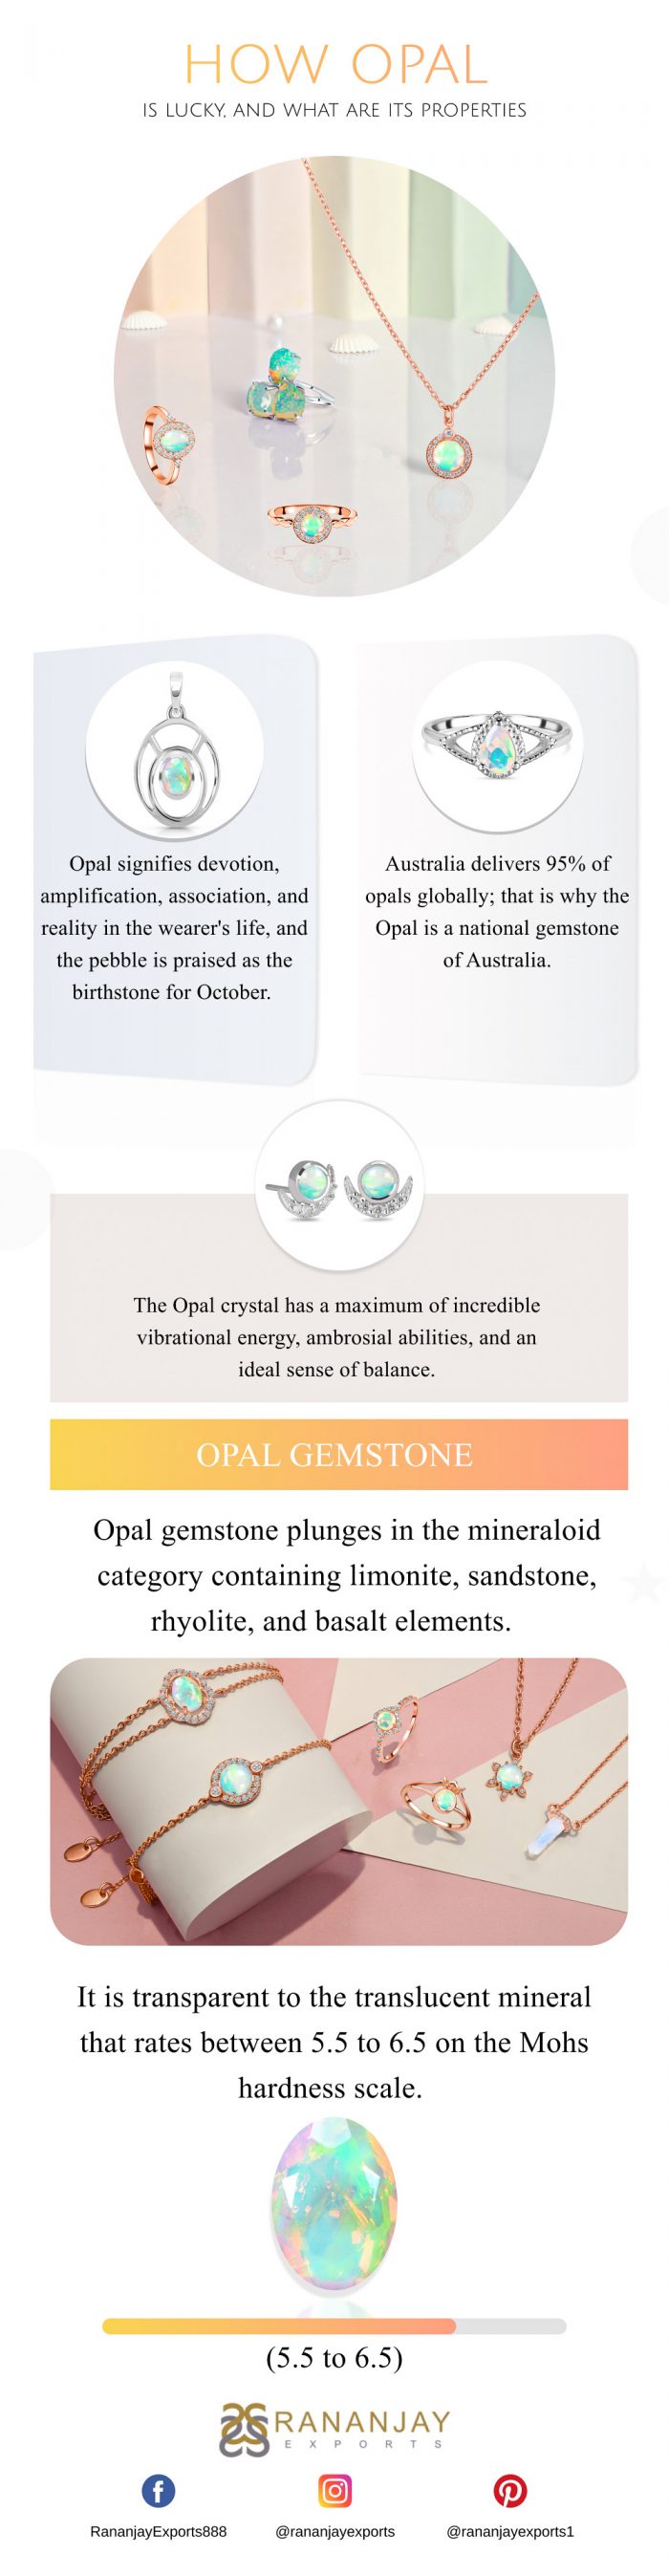 How Opal is lucky, and what are its properties || Rananjay Exports